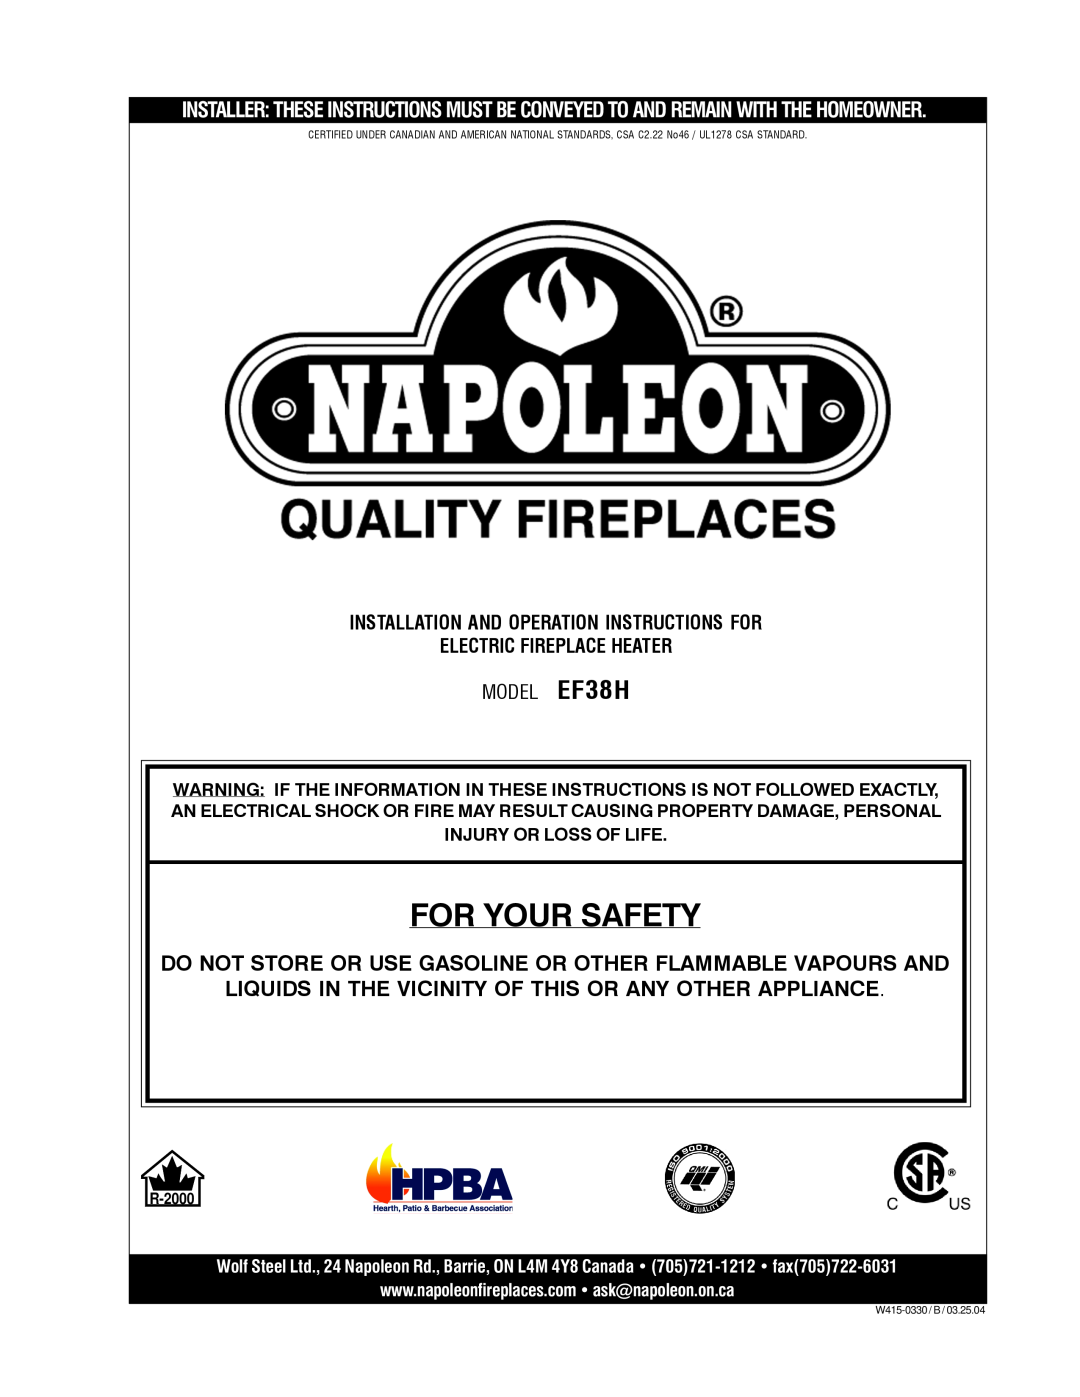 Napoleon Fireplaces EF38H manual For Your Safety, Installation And Operation Instructions For 